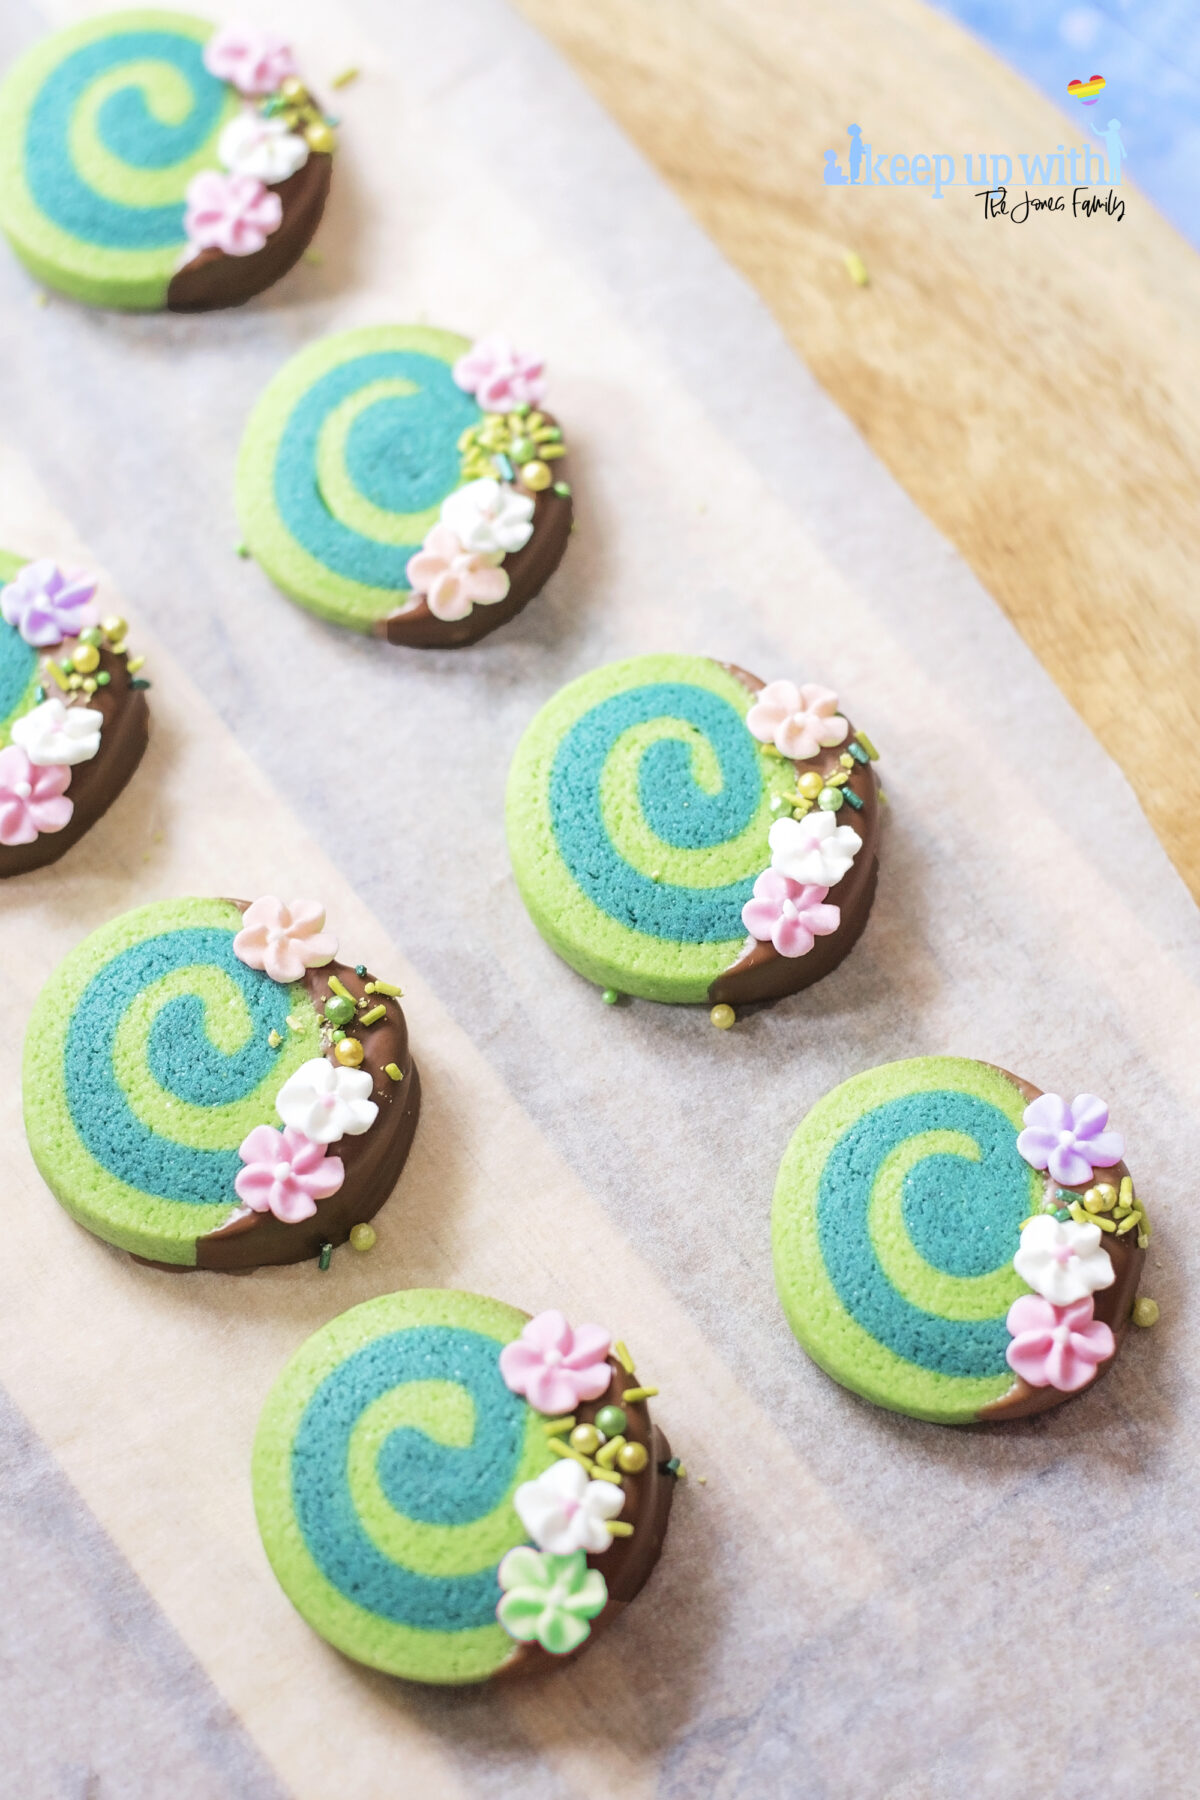 Image shows Disney's Moana Heart of Te Fiti Biscuits, a swirl of bright and dark green, dipped slightly in milk chocolate and embellished with sugar blossom flowers and green sprinkles.  They are set on a light wood chopping board with baking paper underneath. . Image by keep up with the jones family.